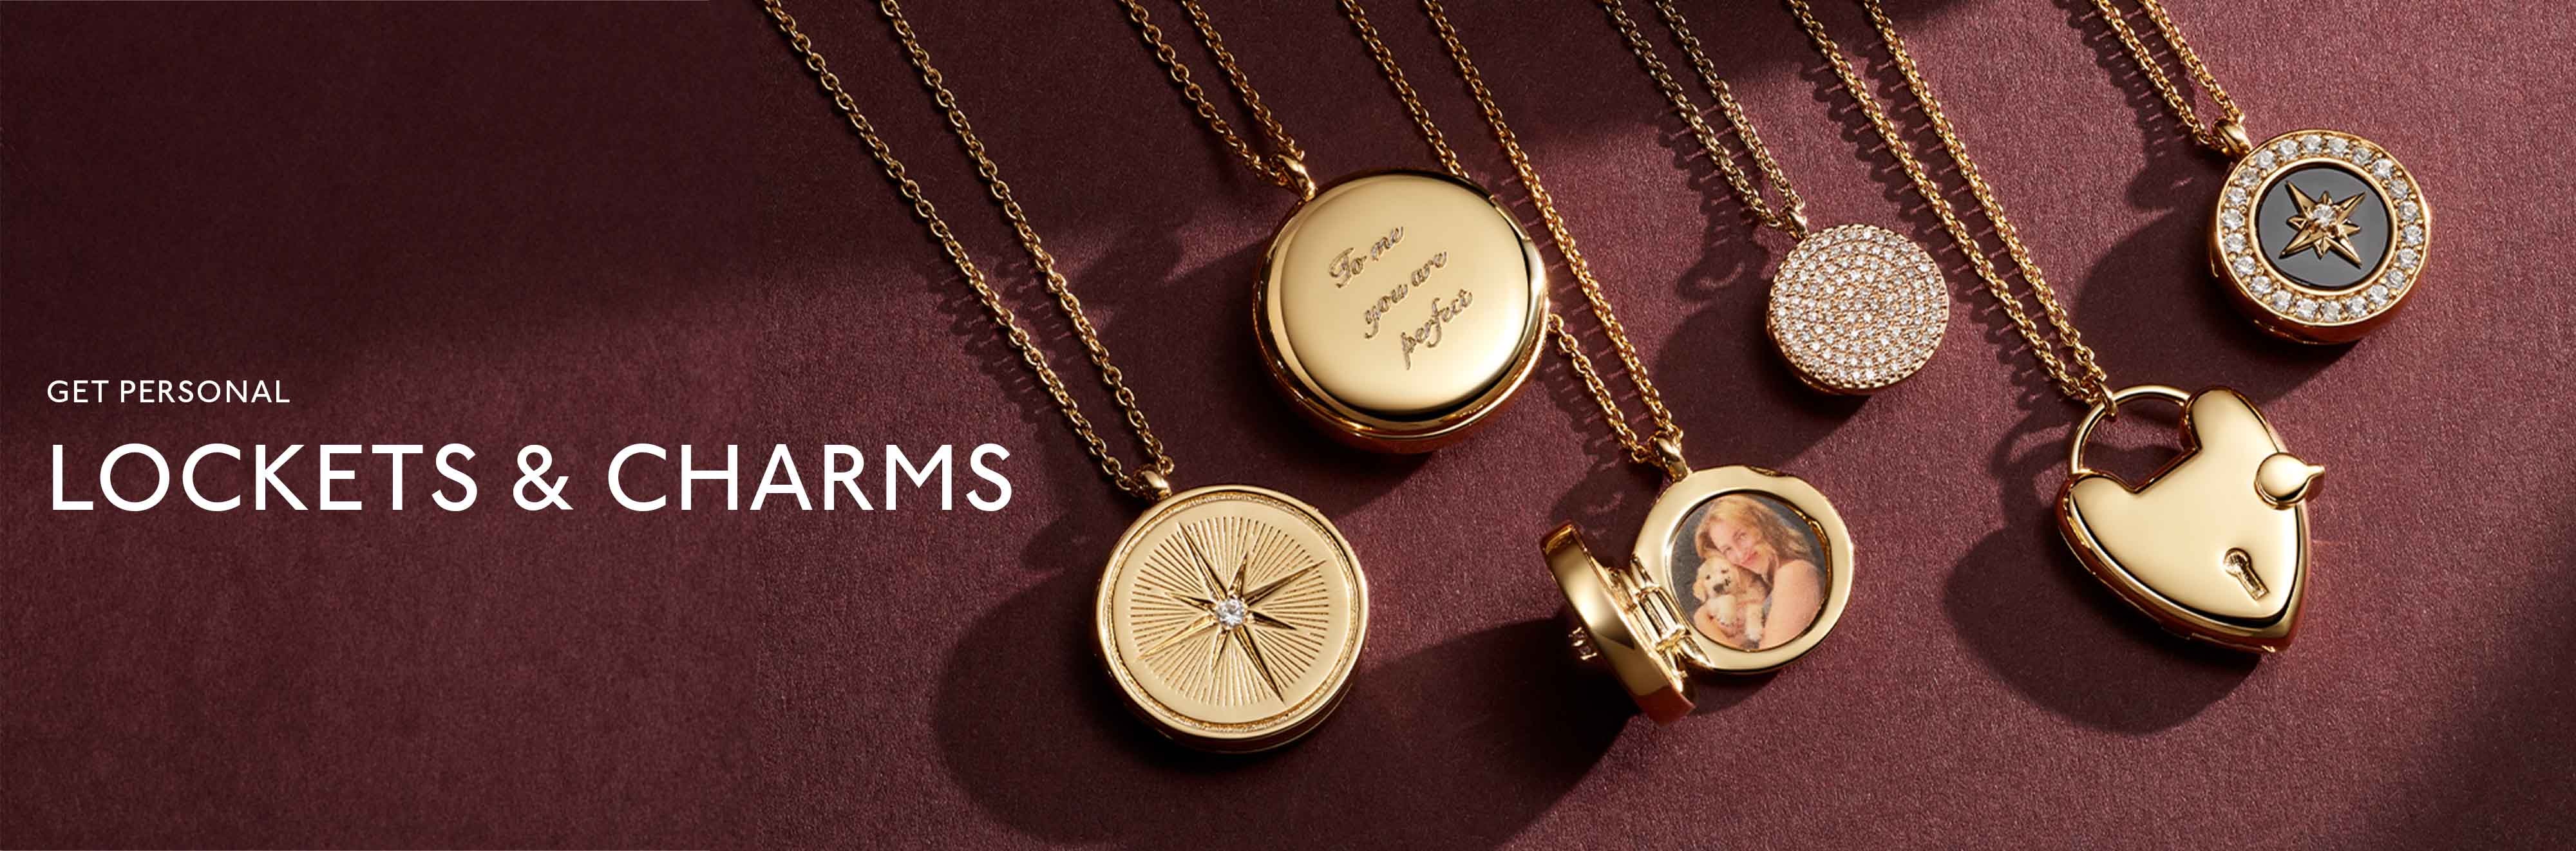 Gold jewellery stack with engraved locket